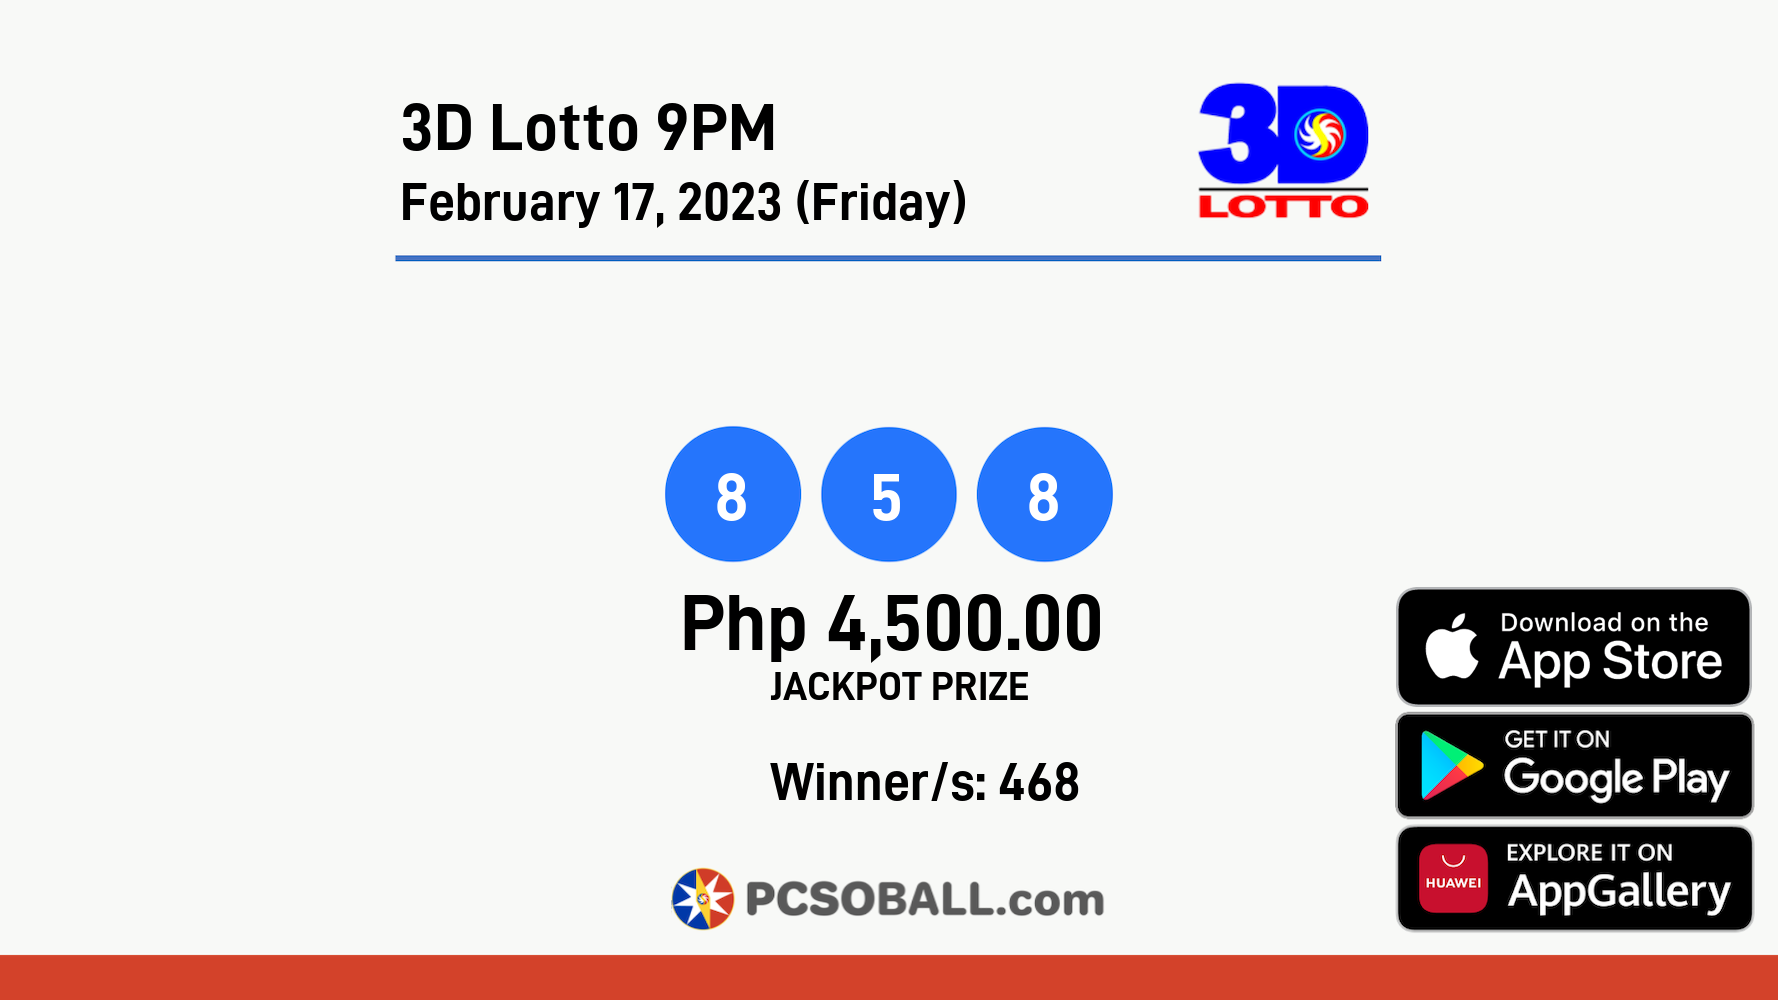 3D Lotto 9PM February 17, 2023 (Friday) Result